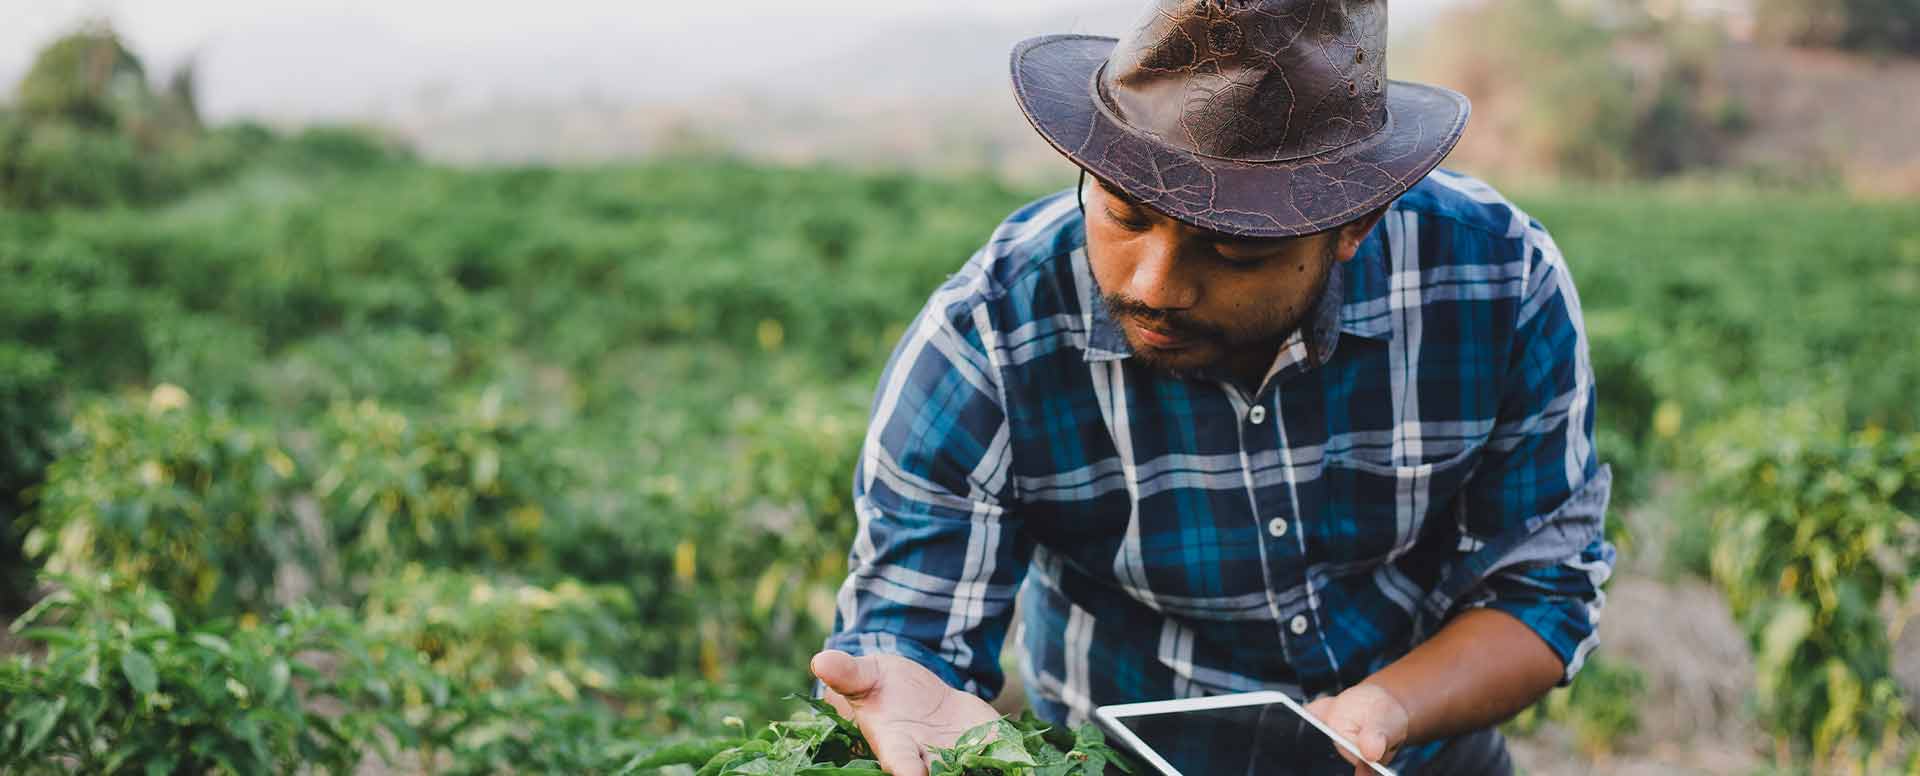 A man checking plants in field